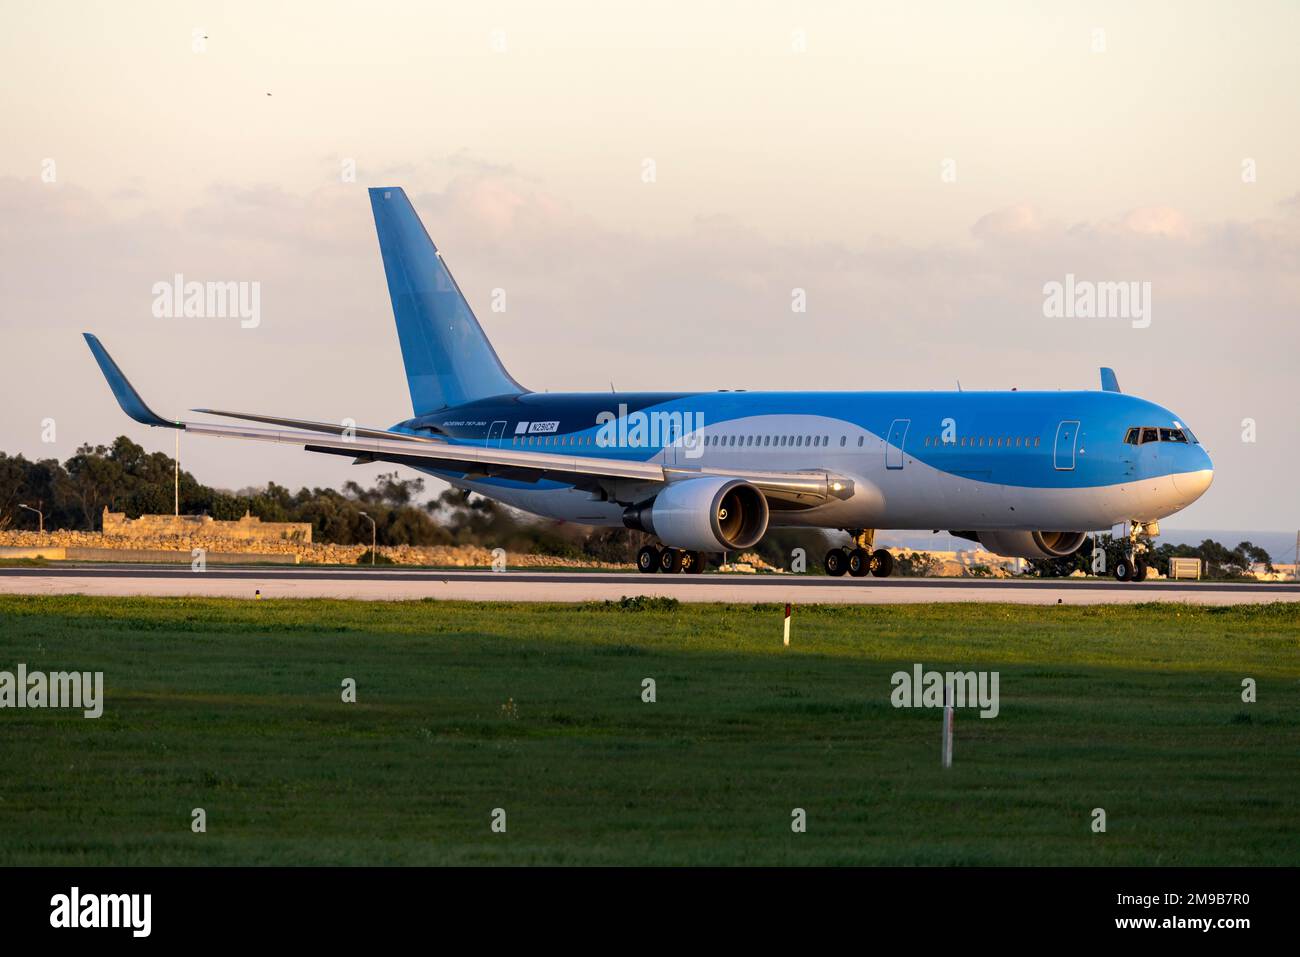 Boeing 767-304-ER (Reg.: N291CR) Ex TUI Airways G-OBYG, to be converted to cargo configuration. Stock Photo